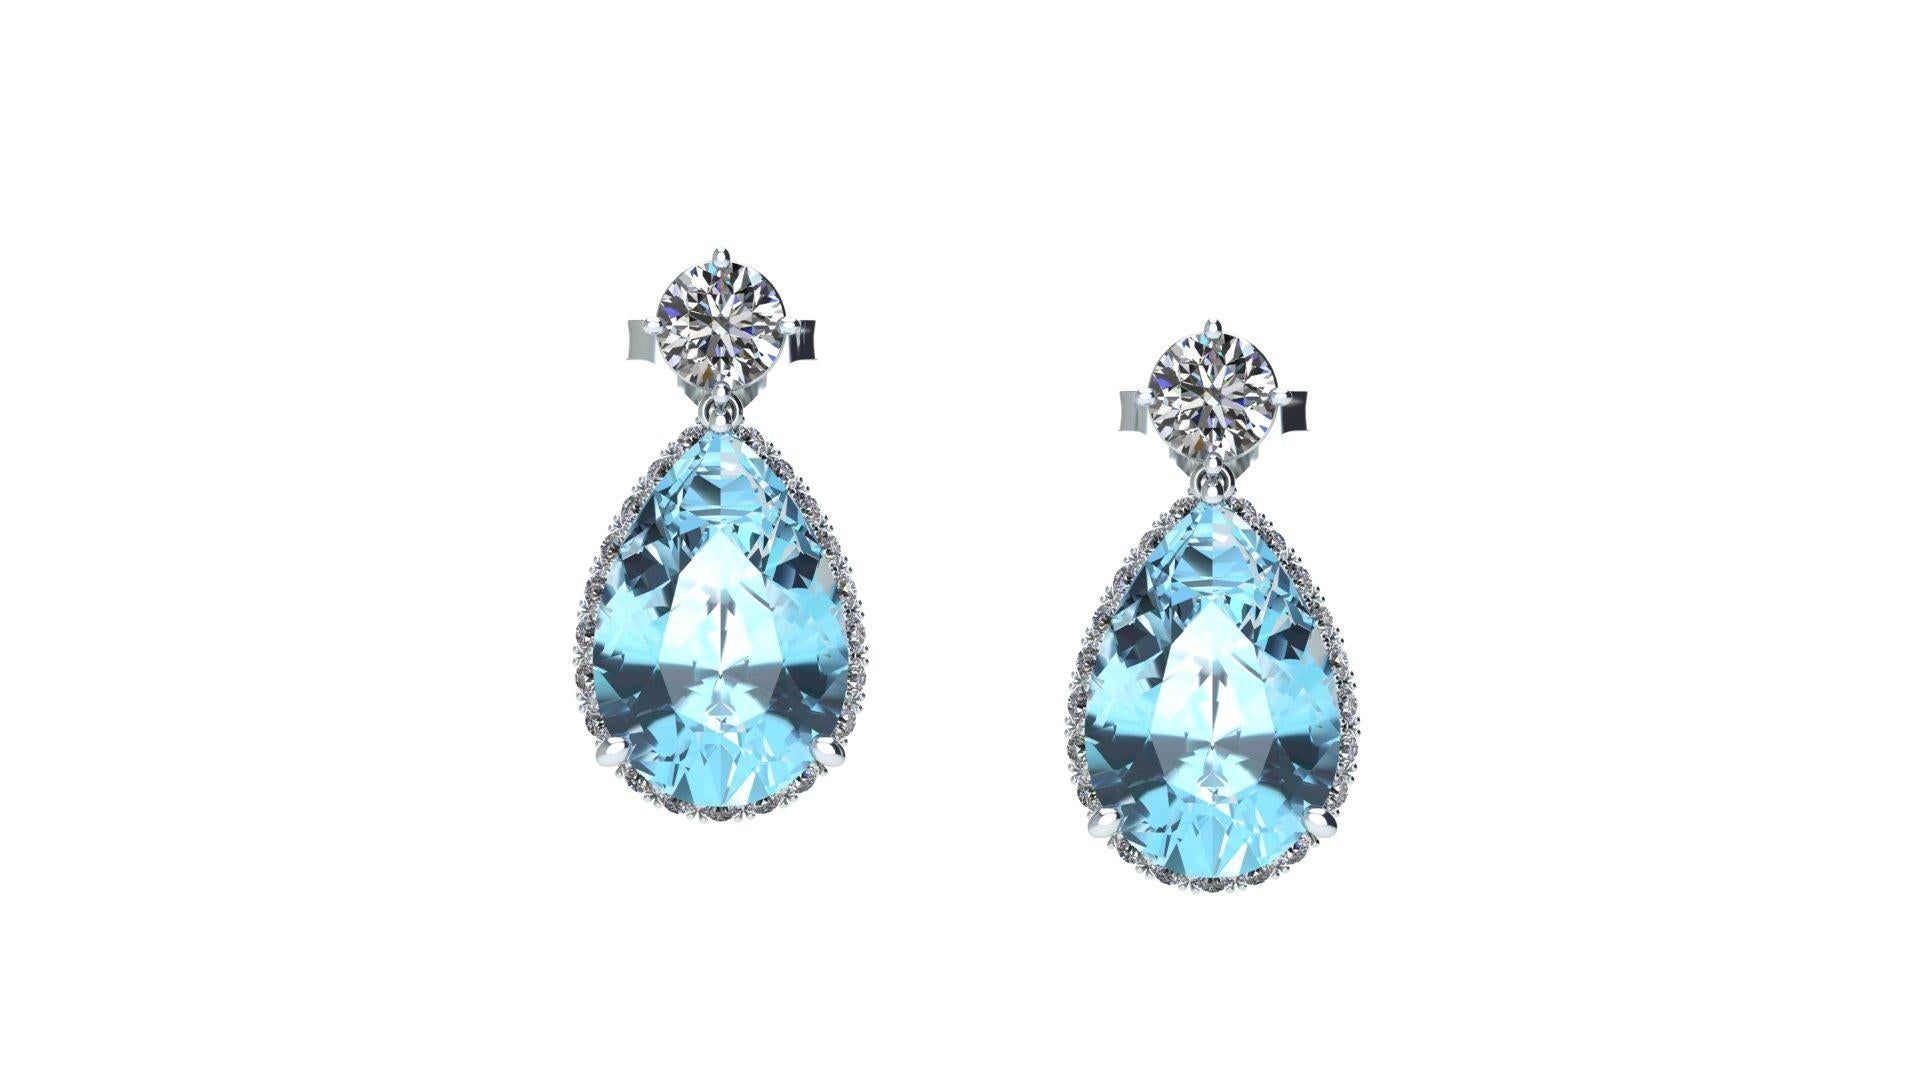 6.61 carats Pear Shape Aquamarine and Diamonds for an approximate total carat weight of 0.80ct of G color, VS clarity, set in Platinum 950 drop dangling earrings
The diamond's halo is designed to be seen from the front and side view of the earrings,